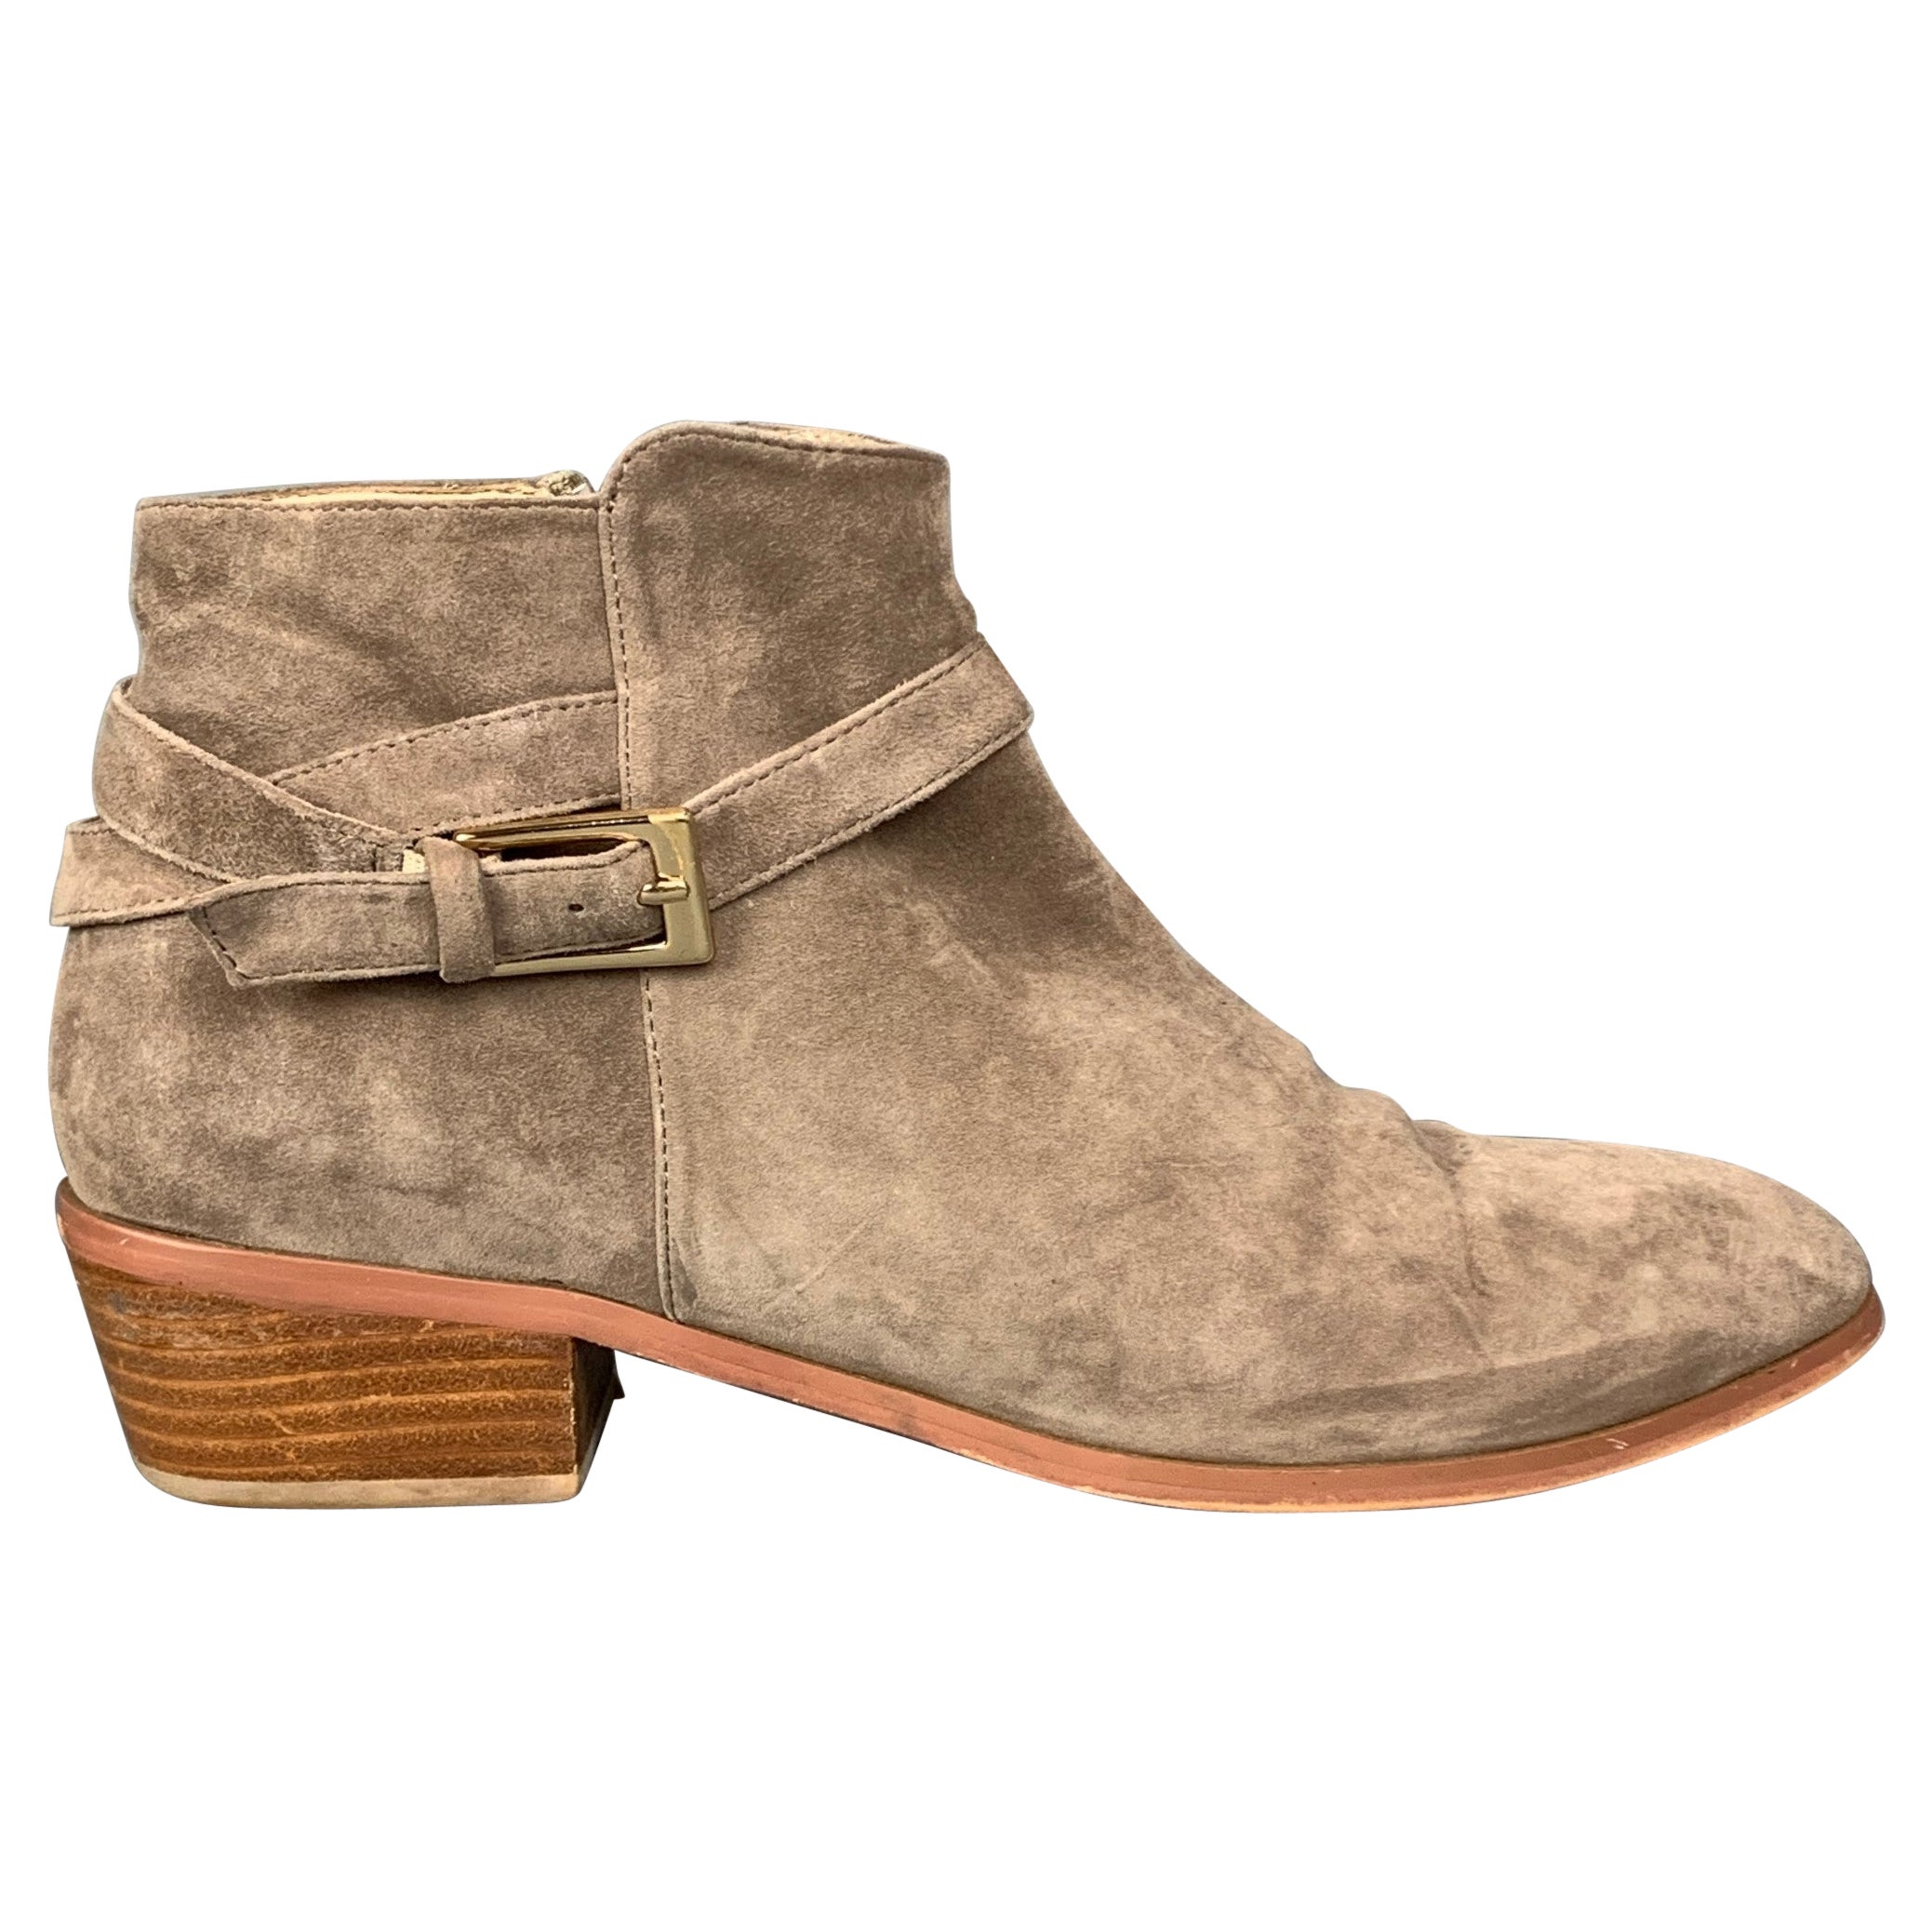 BARNEY'S NEW YORK Size 9 Taupe Suede Ankle Strap Boots